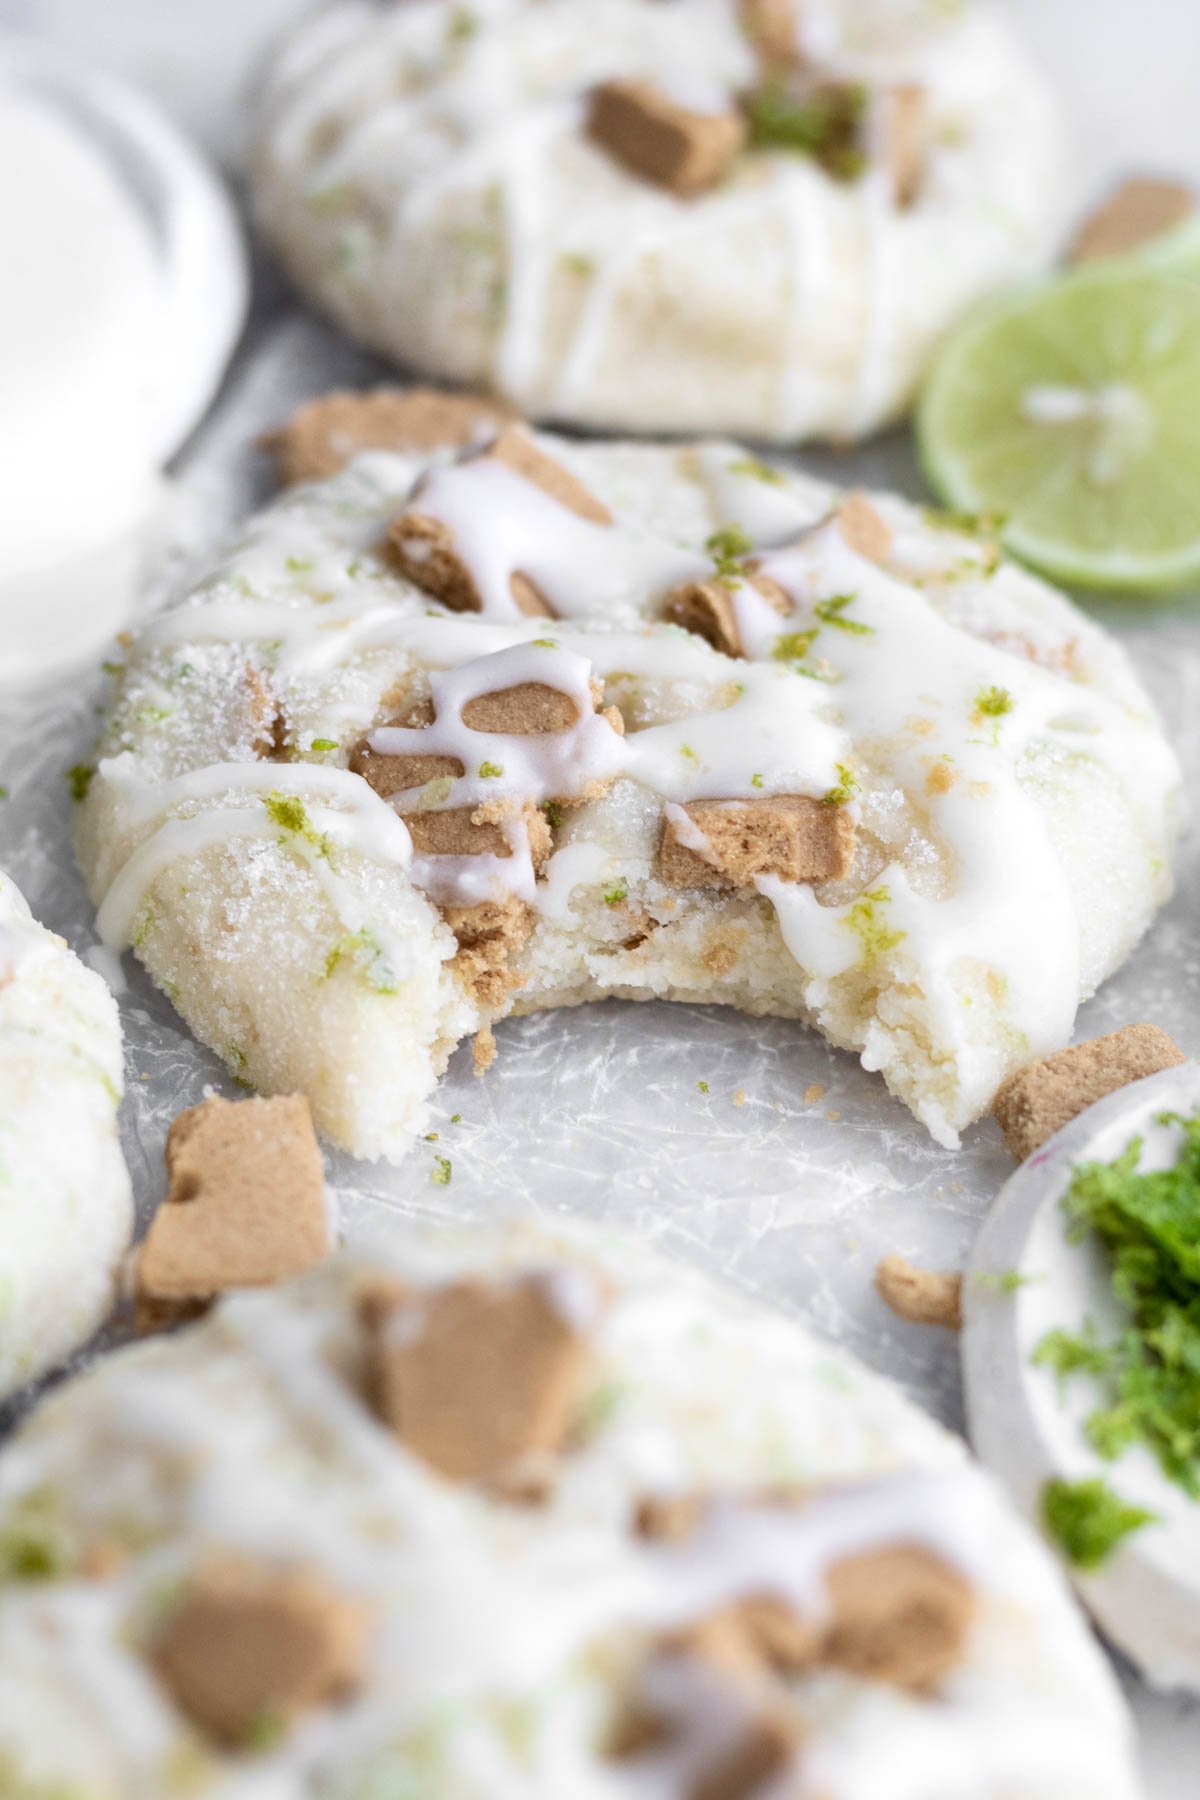 A sugar dusted Key Lime Cookie that’s bitten reveals its soft and warm interior.